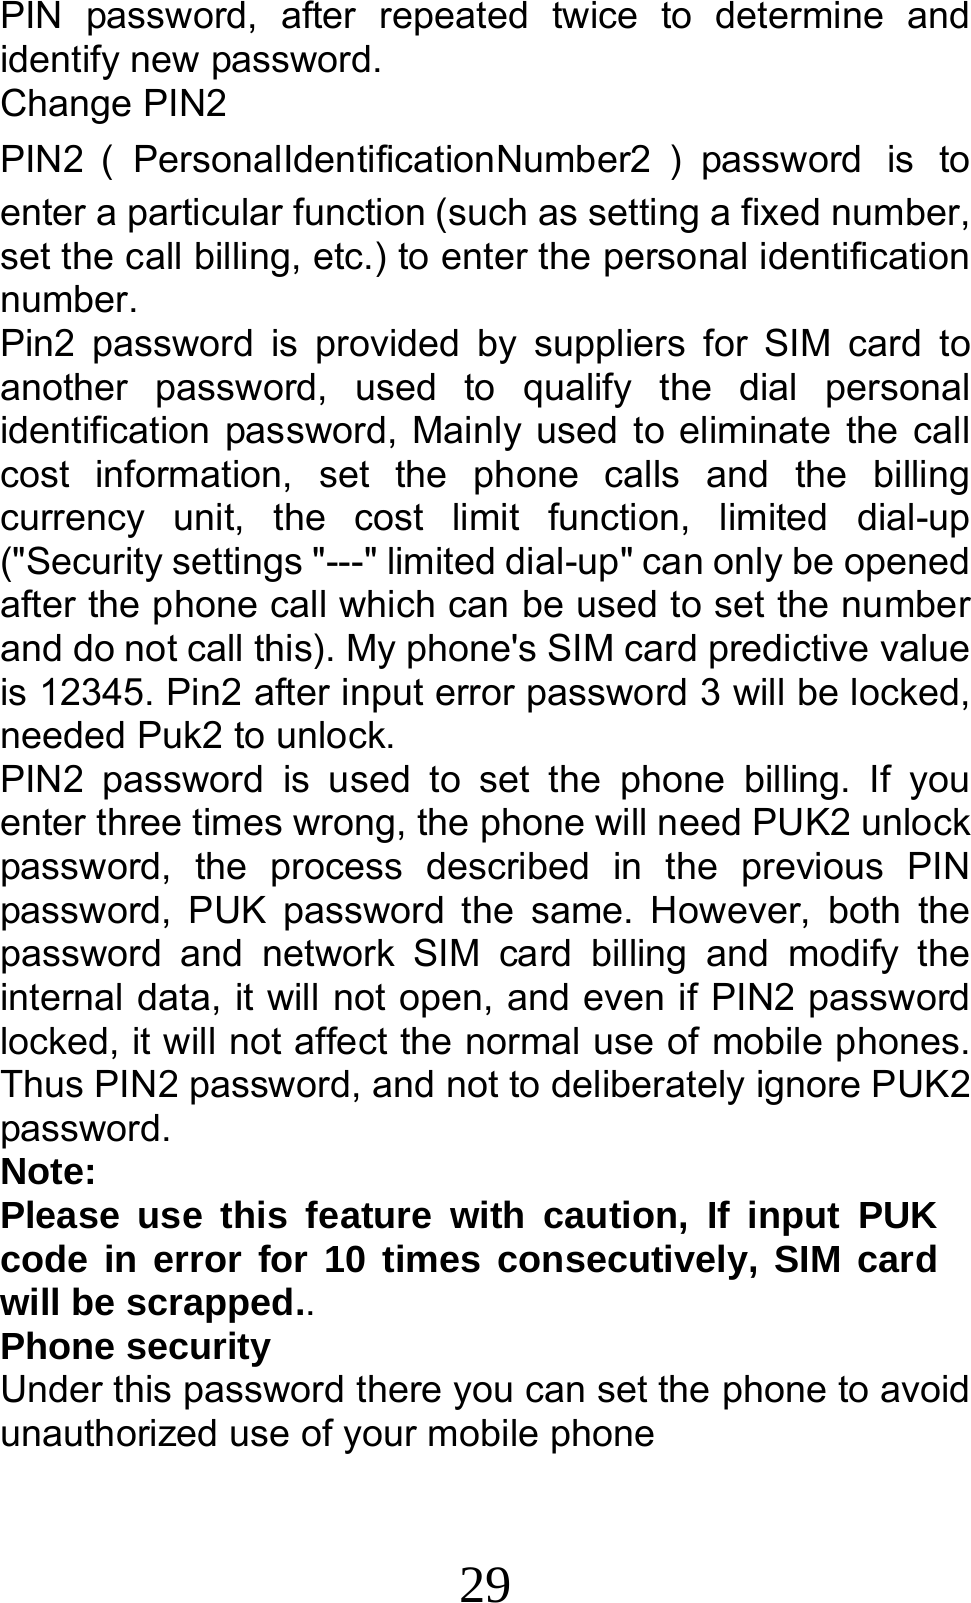 29 PIN password, after repeated twice to determine and identify new password. Change PIN2 PIN2 （PersonalIdentificationNumber2 ）password is to enter a particular function (such as setting a fixed number, set the call billing, etc.) to enter the personal identification number. Pin2 password is provided by suppliers for SIM card to another password, used to qualify the dial personal identification password, Mainly used to eliminate the call cost information, set the phone calls and the billing currency unit, the cost limit function, limited dial-up (&quot;Security settings &quot;---&quot; limited dial-up&quot; can only be opened after the phone call which can be used to set the number and do not call this). My phone&apos;s SIM card predictive value is 12345. Pin2 after input error password 3 will be locked, needed Puk2 to unlock. PIN2 password is used to set the phone billing. If you enter three times wrong, the phone will need PUK2 unlock password, the process described in the previous PIN password, PUK password the same. However, both the password and network SIM card billing and modify the internal data, it will not open, and even if PIN2 password locked, it will not affect the normal use of mobile phones. Thus PIN2 password, and not to deliberately ignore PUK2 password. Note:  Please use this feature with caution, If input PUK code in error for 10 times consecutively, SIM card will be scrapped.. Phone security Under this password there you can set the phone to avoid unauthorized use of your mobile phone 